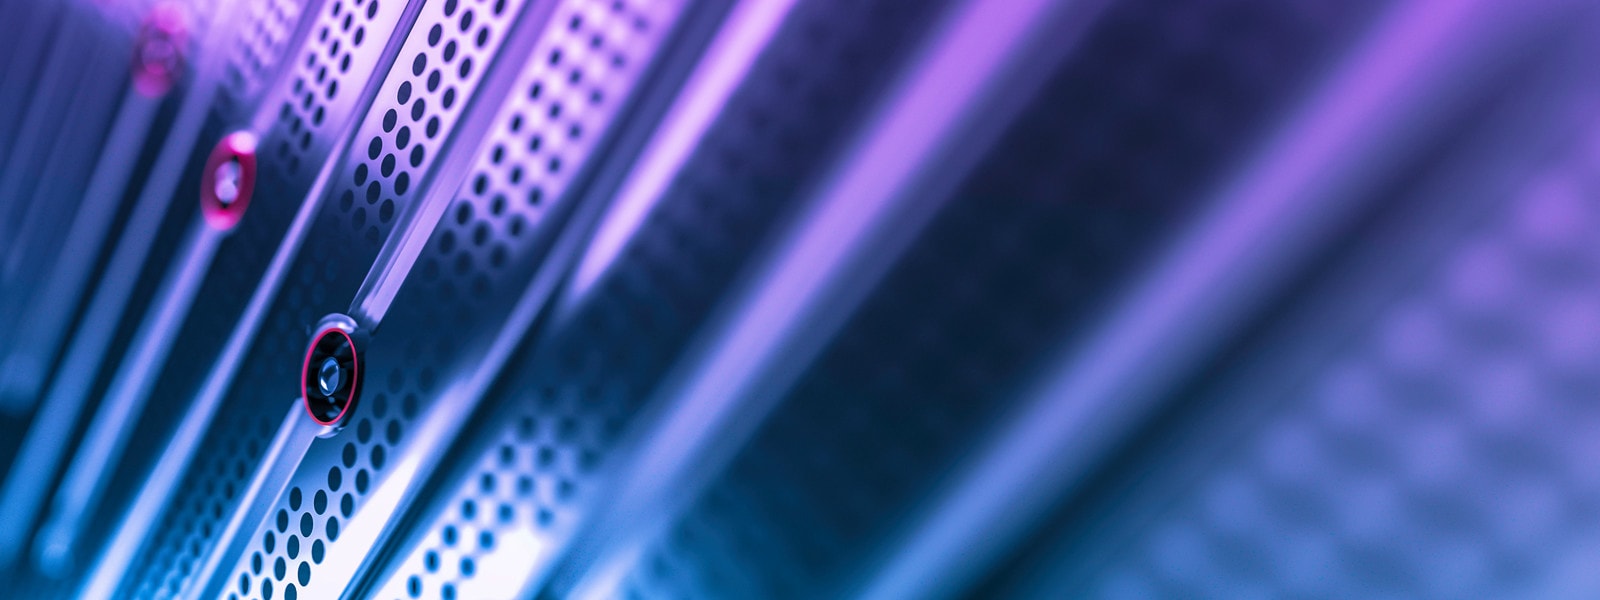 Close view of a server illuminated in blue and purple hues